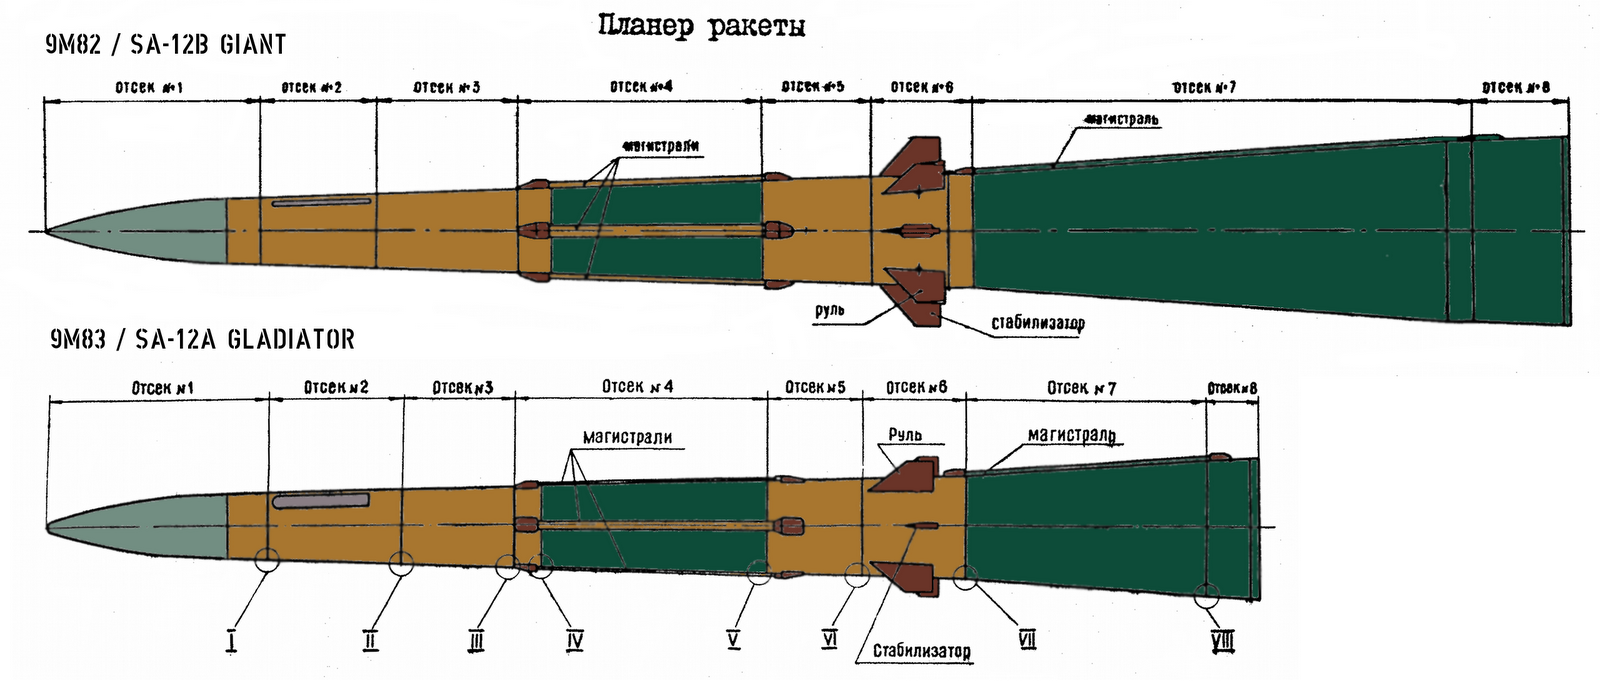 9M82%252B9M83-Missile-Layout-AC.png